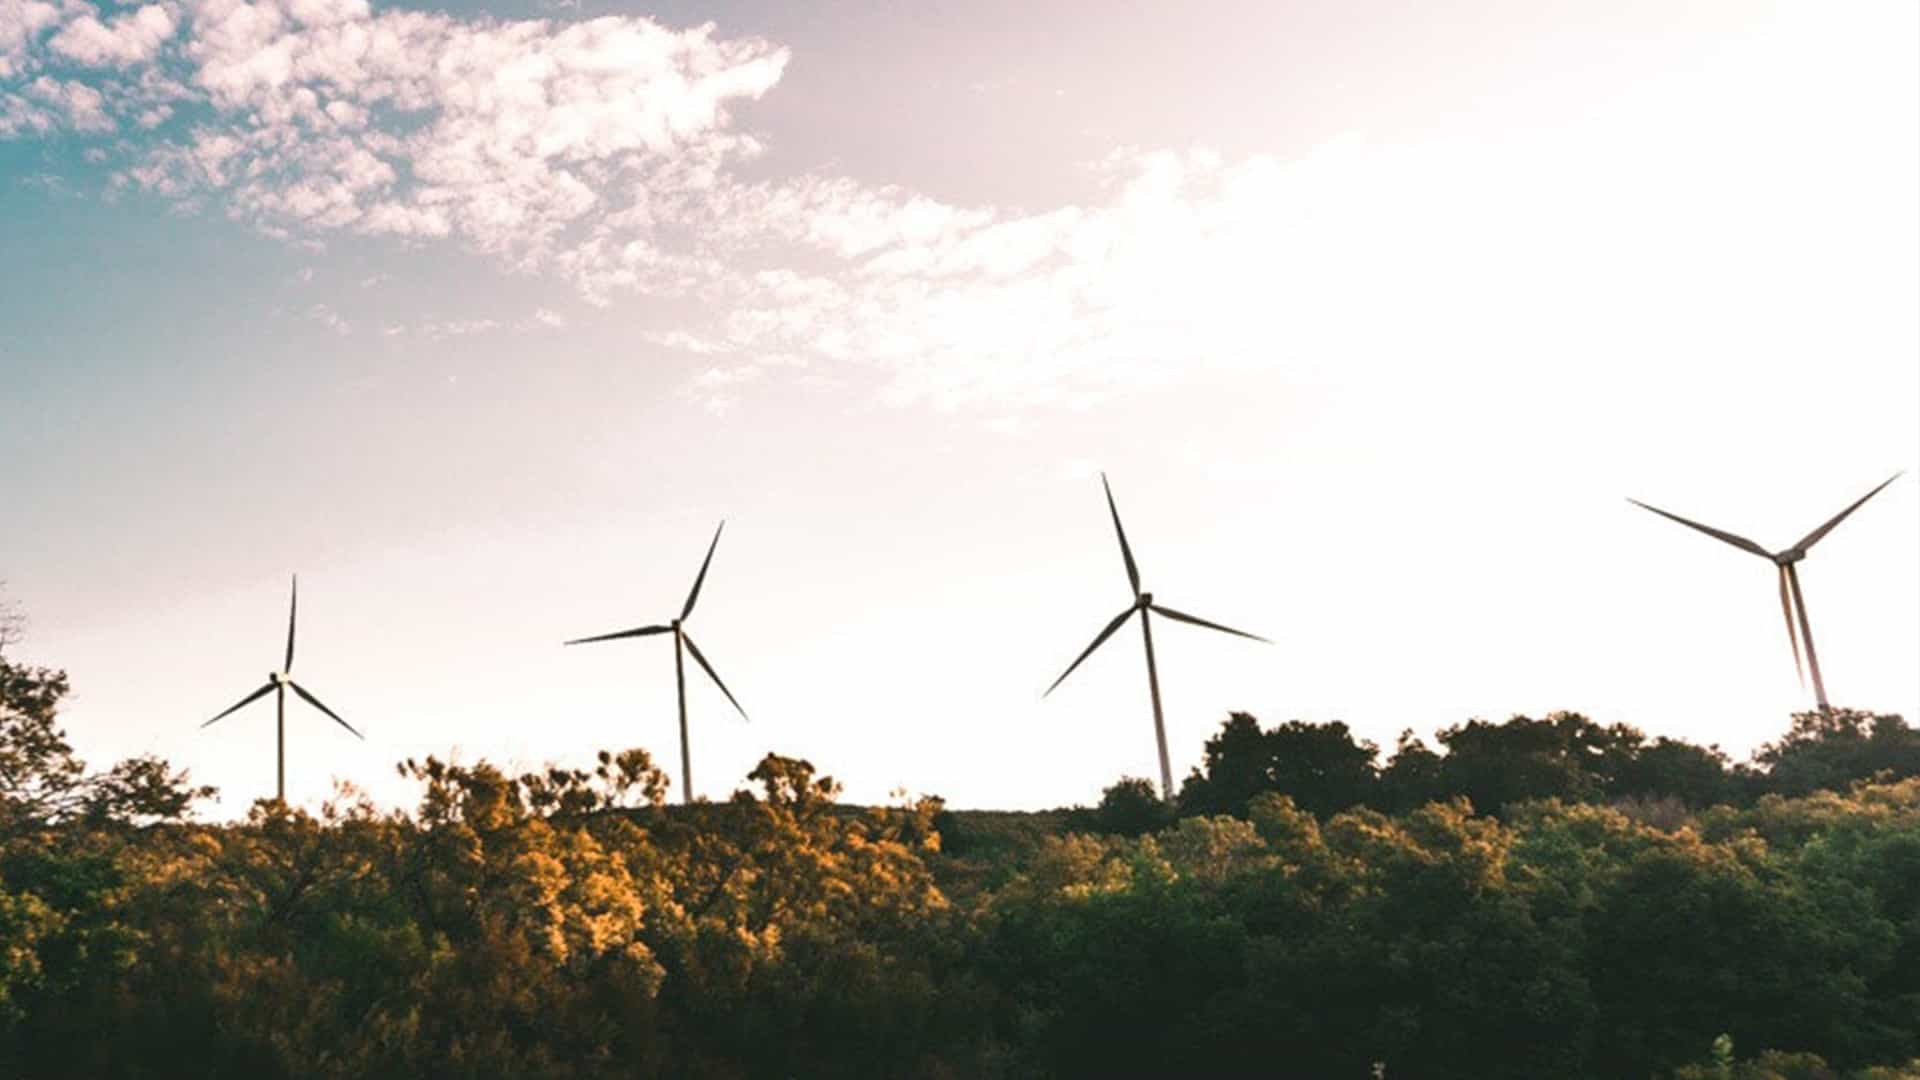 Blacklane invests in a wind farm in India.